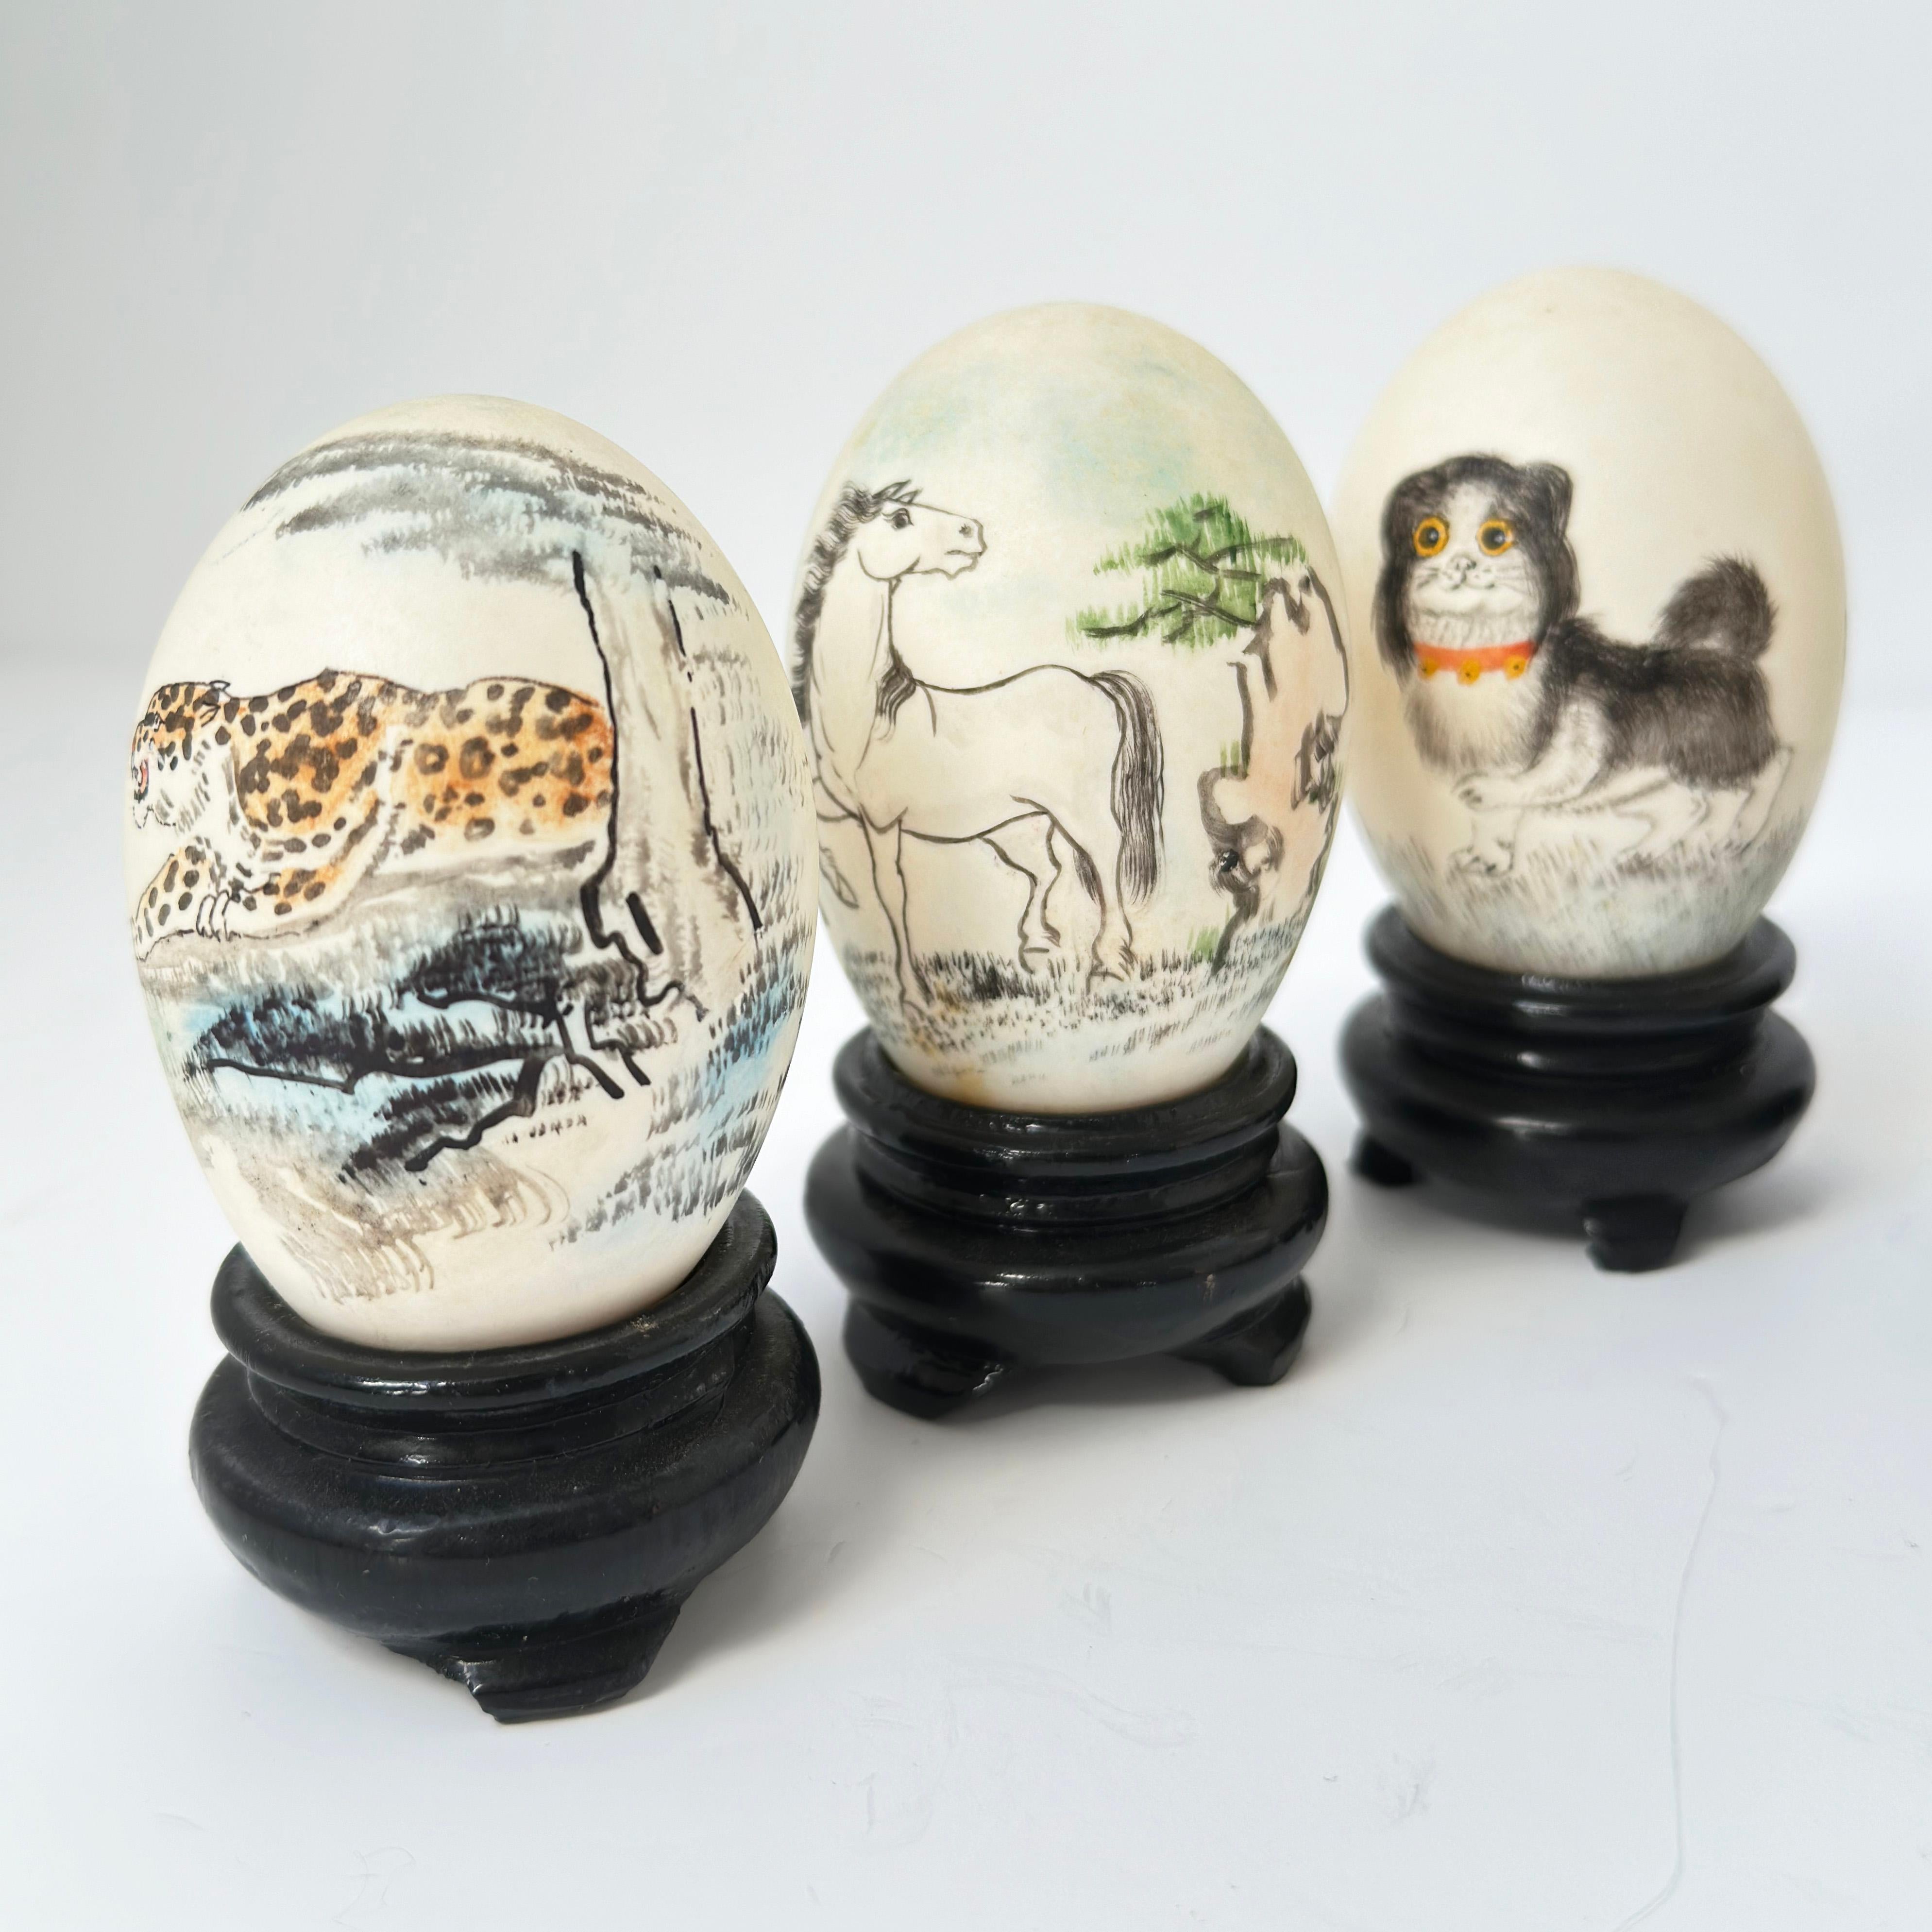 Late 20th Century Vintage Chinese Painted Eggshells on Wooden Display Plinths - Set of 6